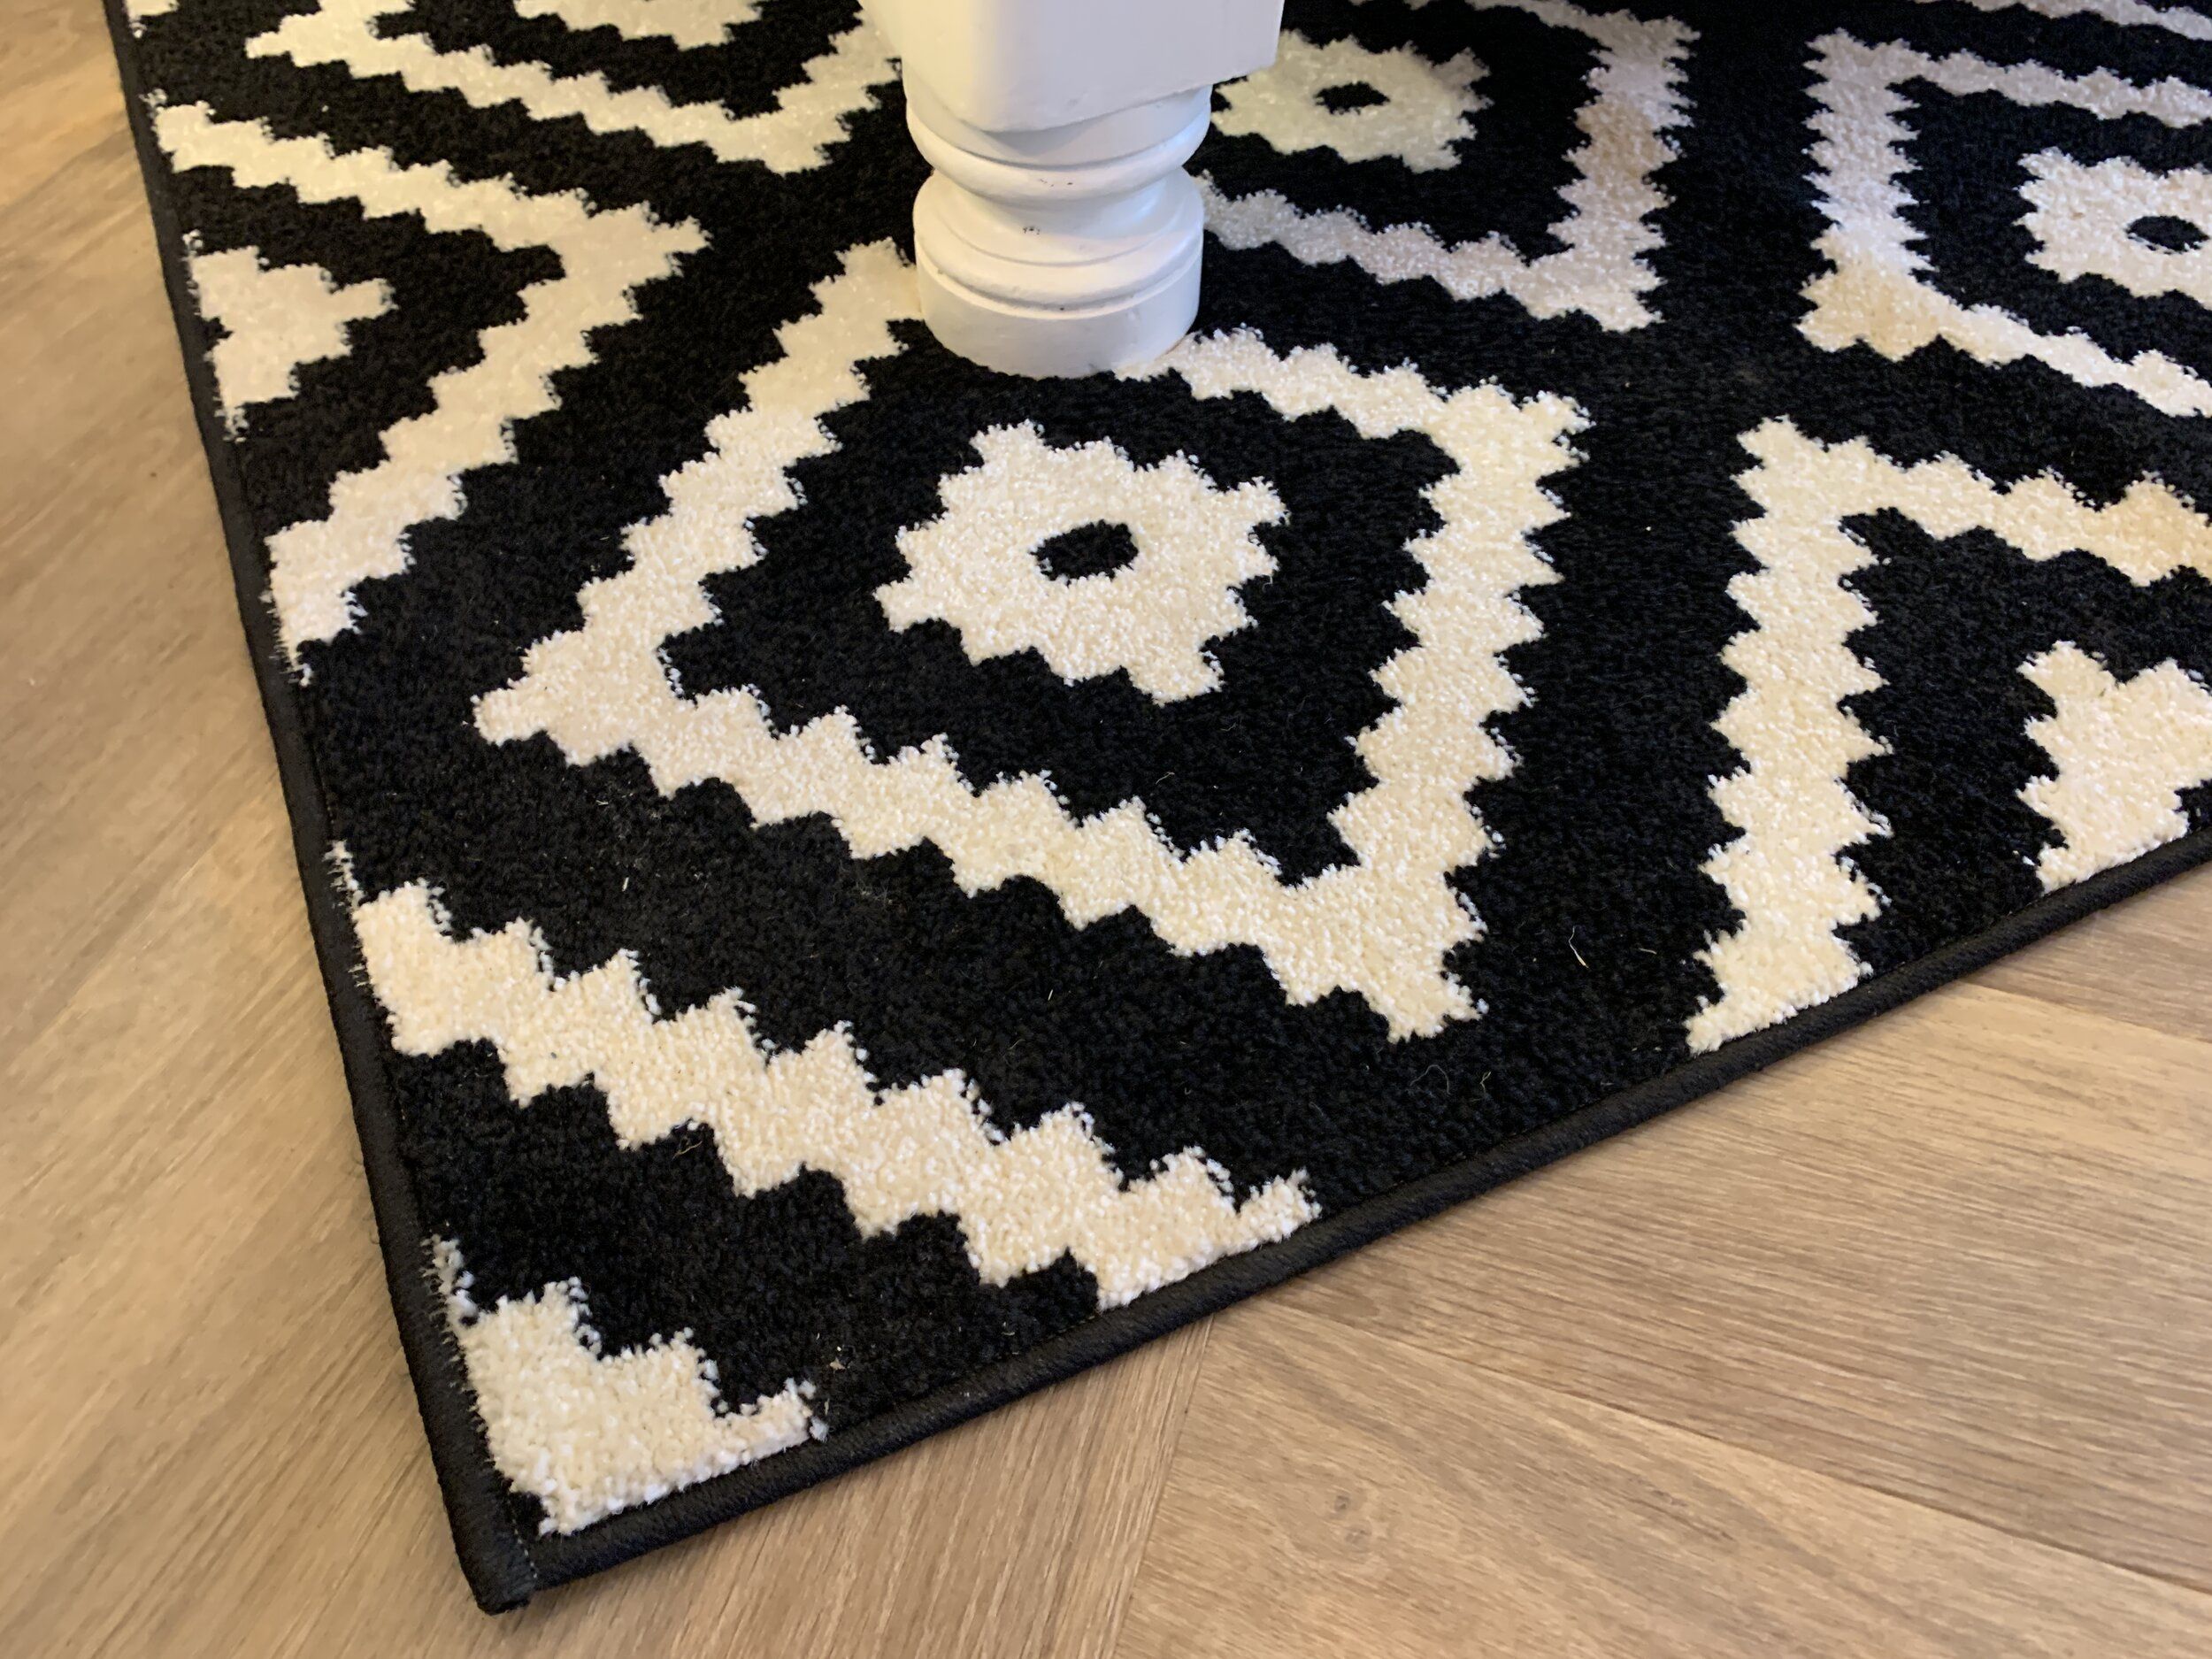 Marsh & Co | Black & White Aztec Design Rug | Carpets & Rugs Intended For Black And White Rugs (View 6 of 15)